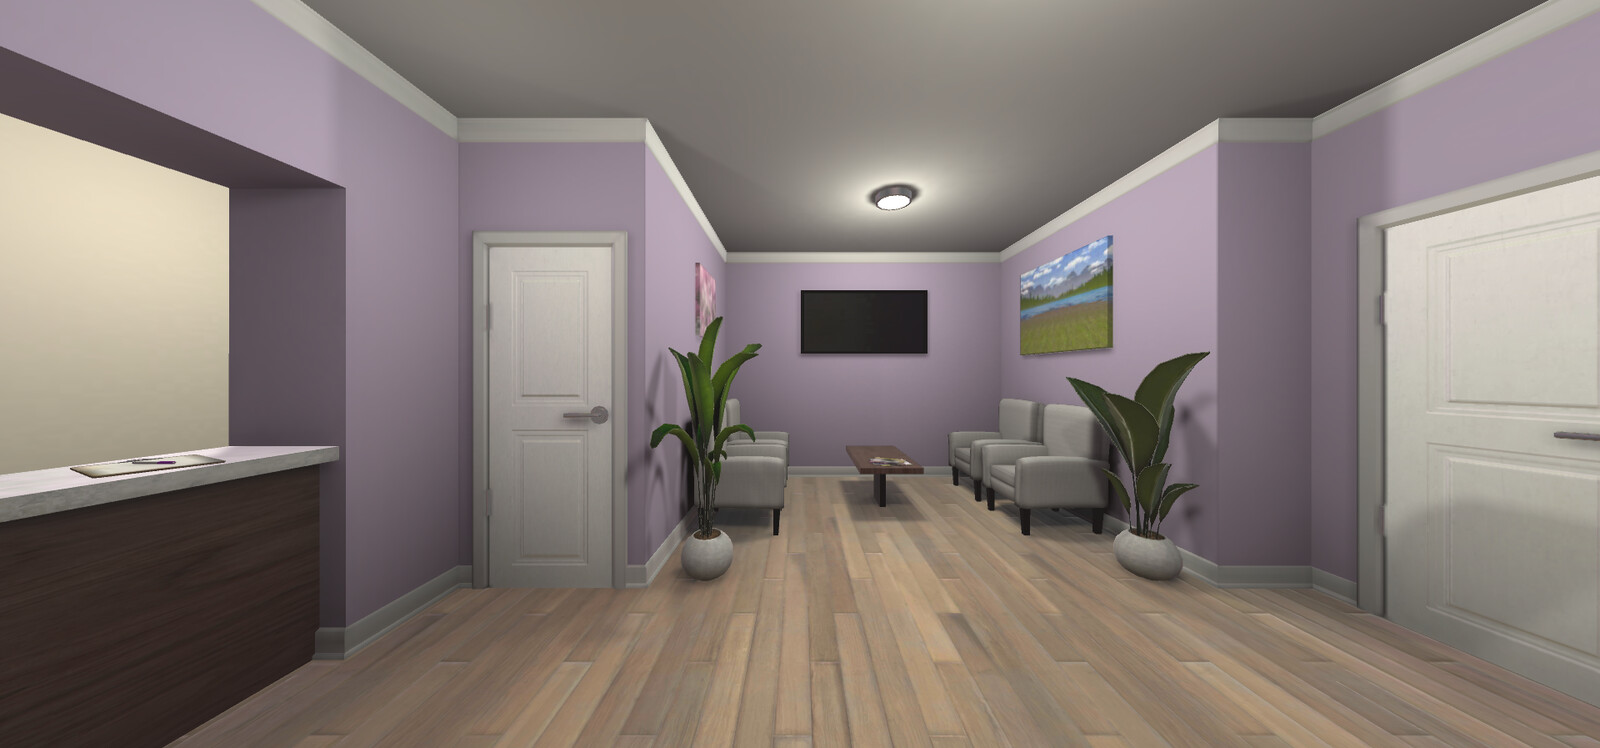 Image of the waiting room from The Power of VR (NurtureVR)